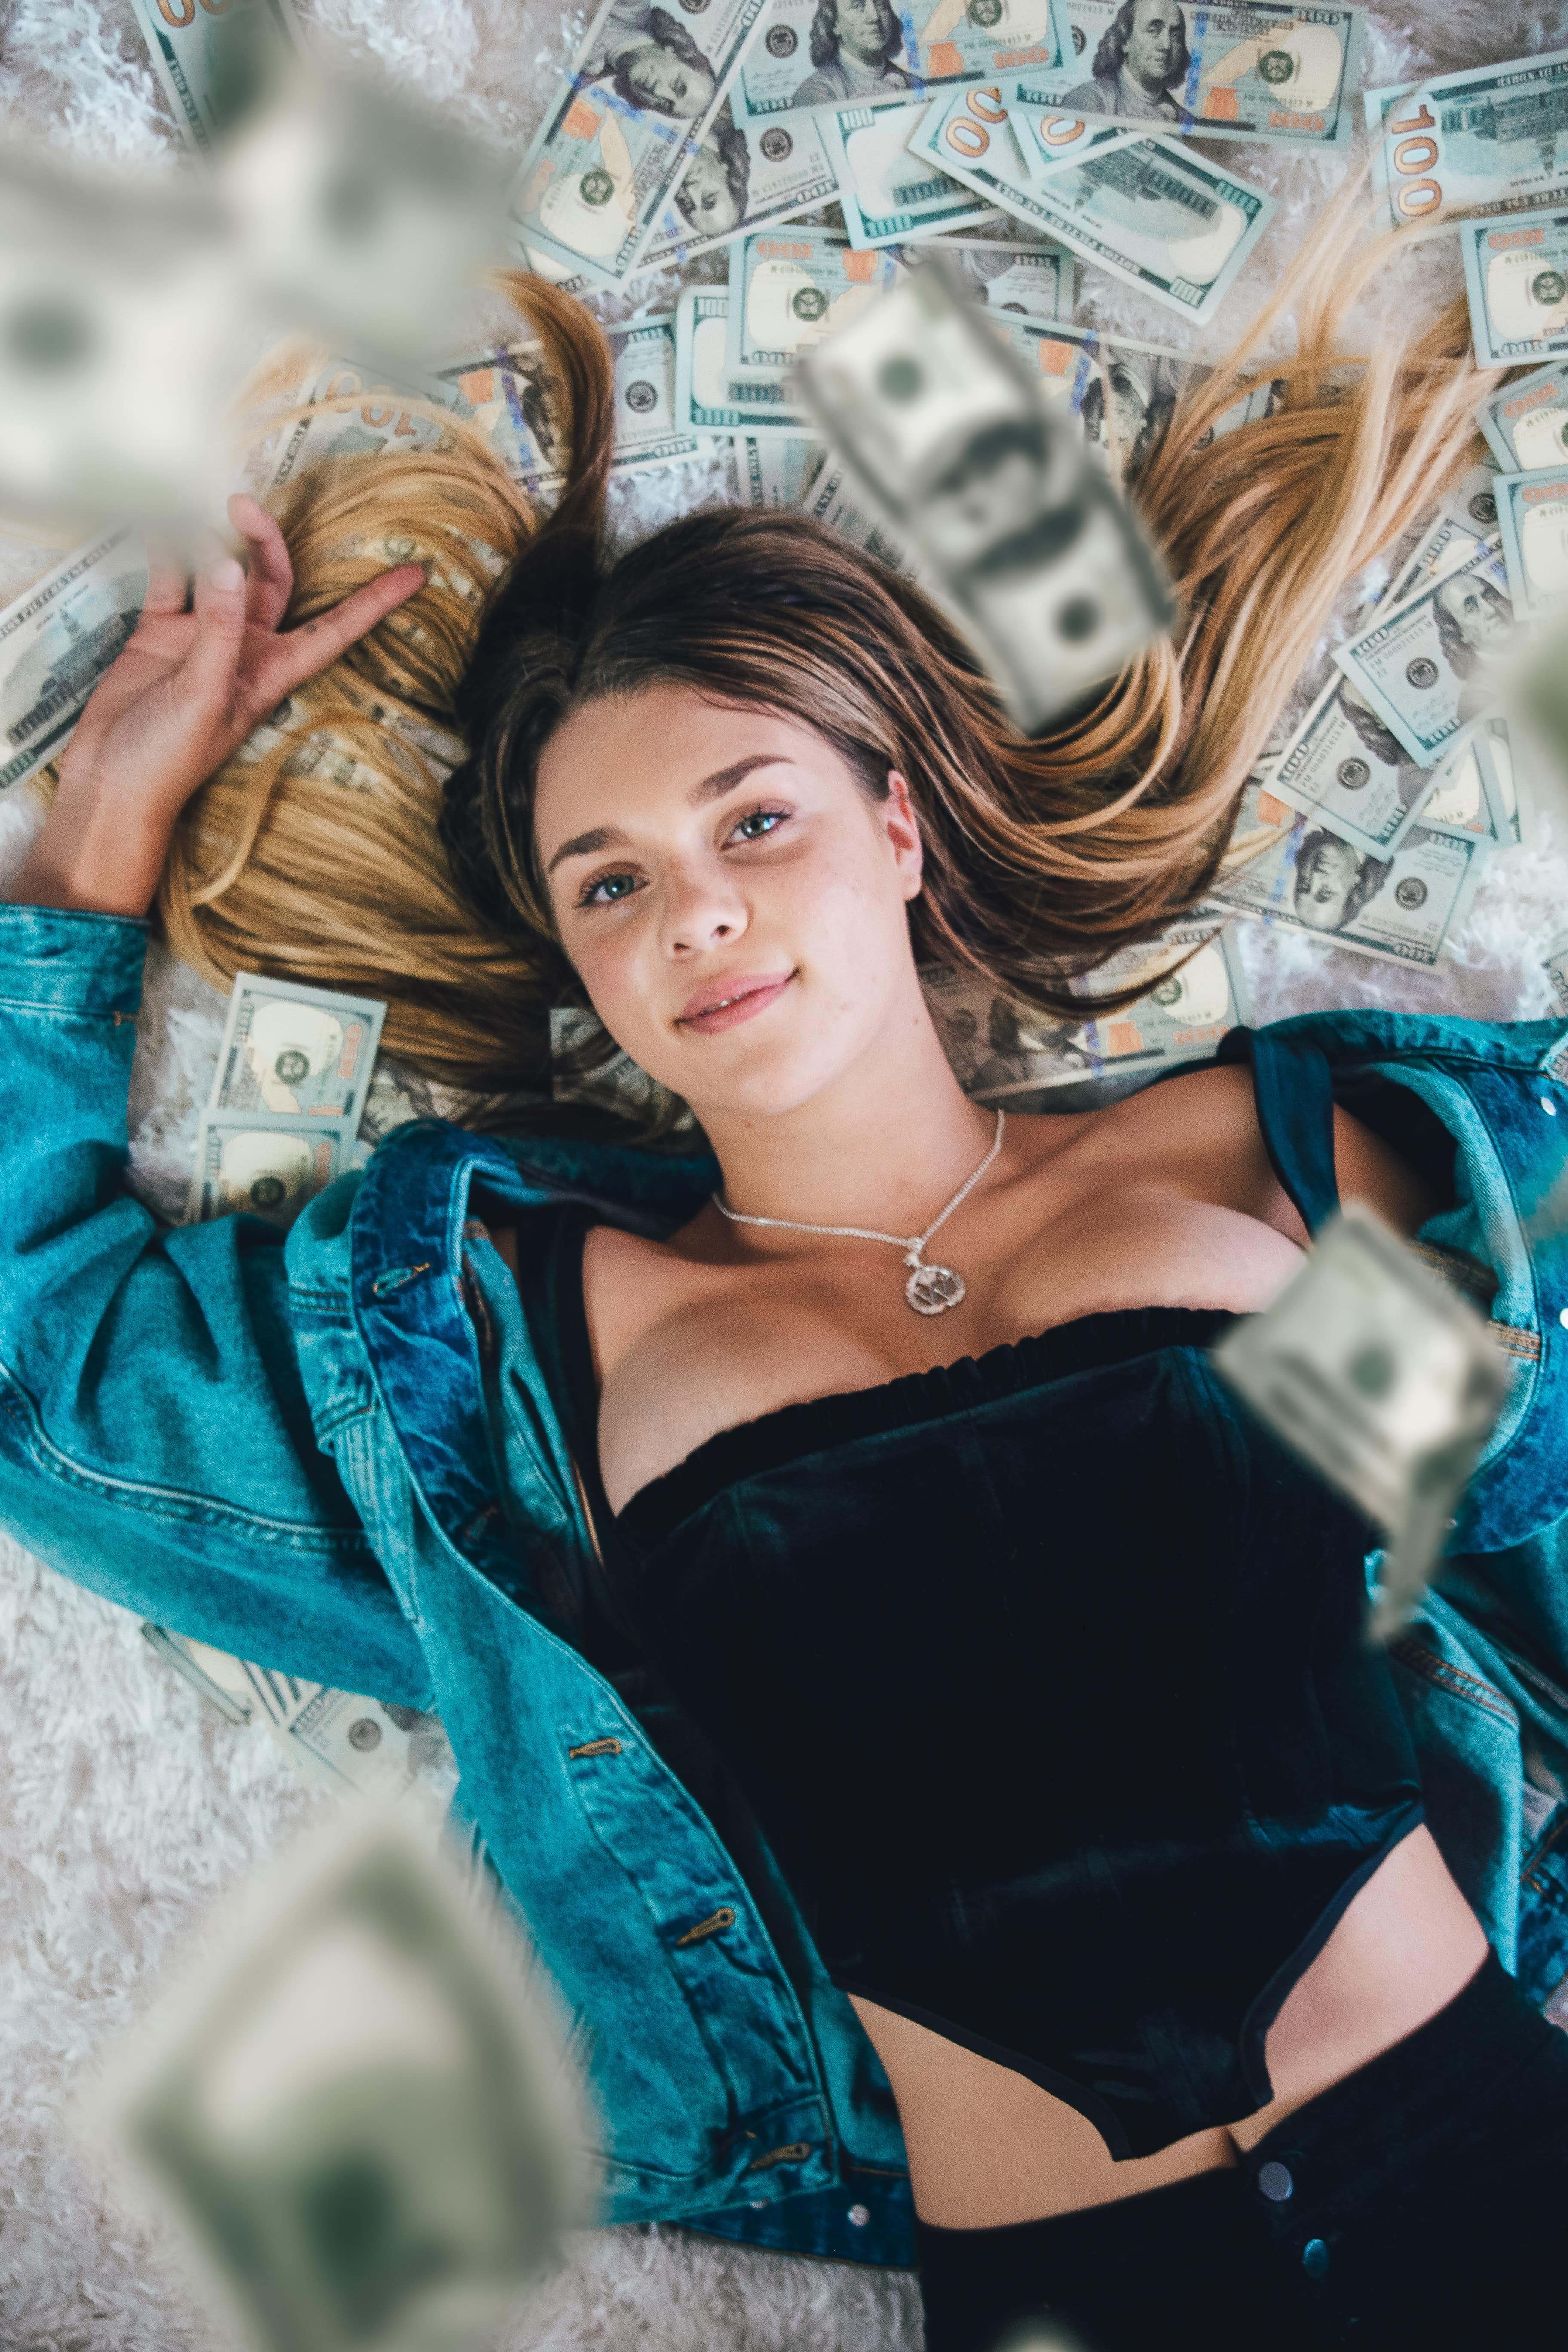 How much do Onlyf models earn? A guide to unlocking income as an Onlyf model